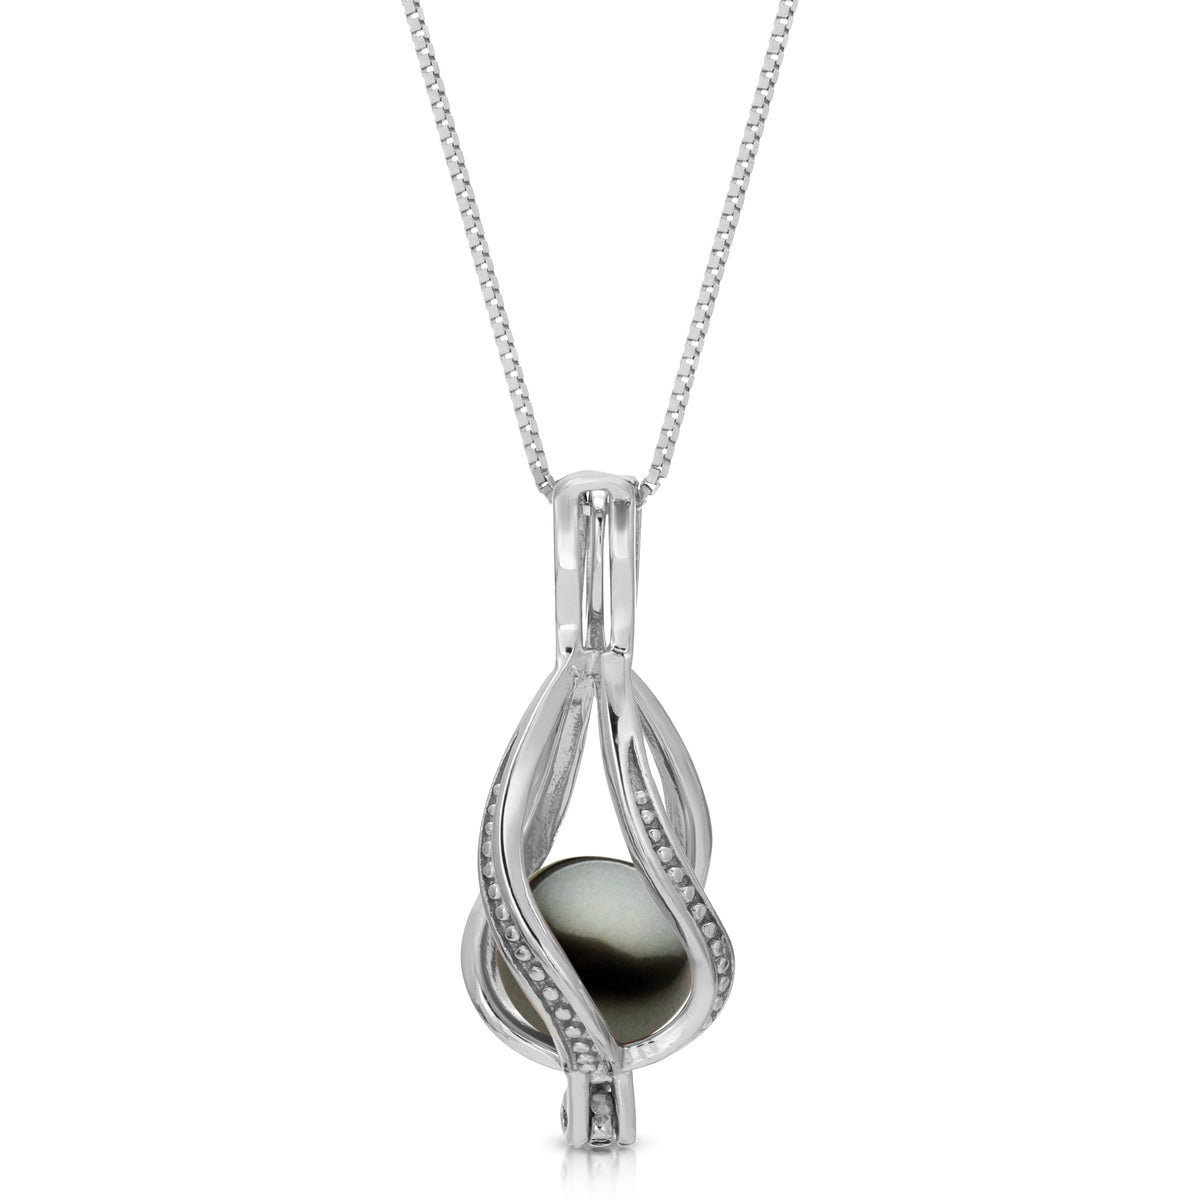 Sterling Silver Pearl Cage Pendant - Swirled Design Pearl Cage Pendant